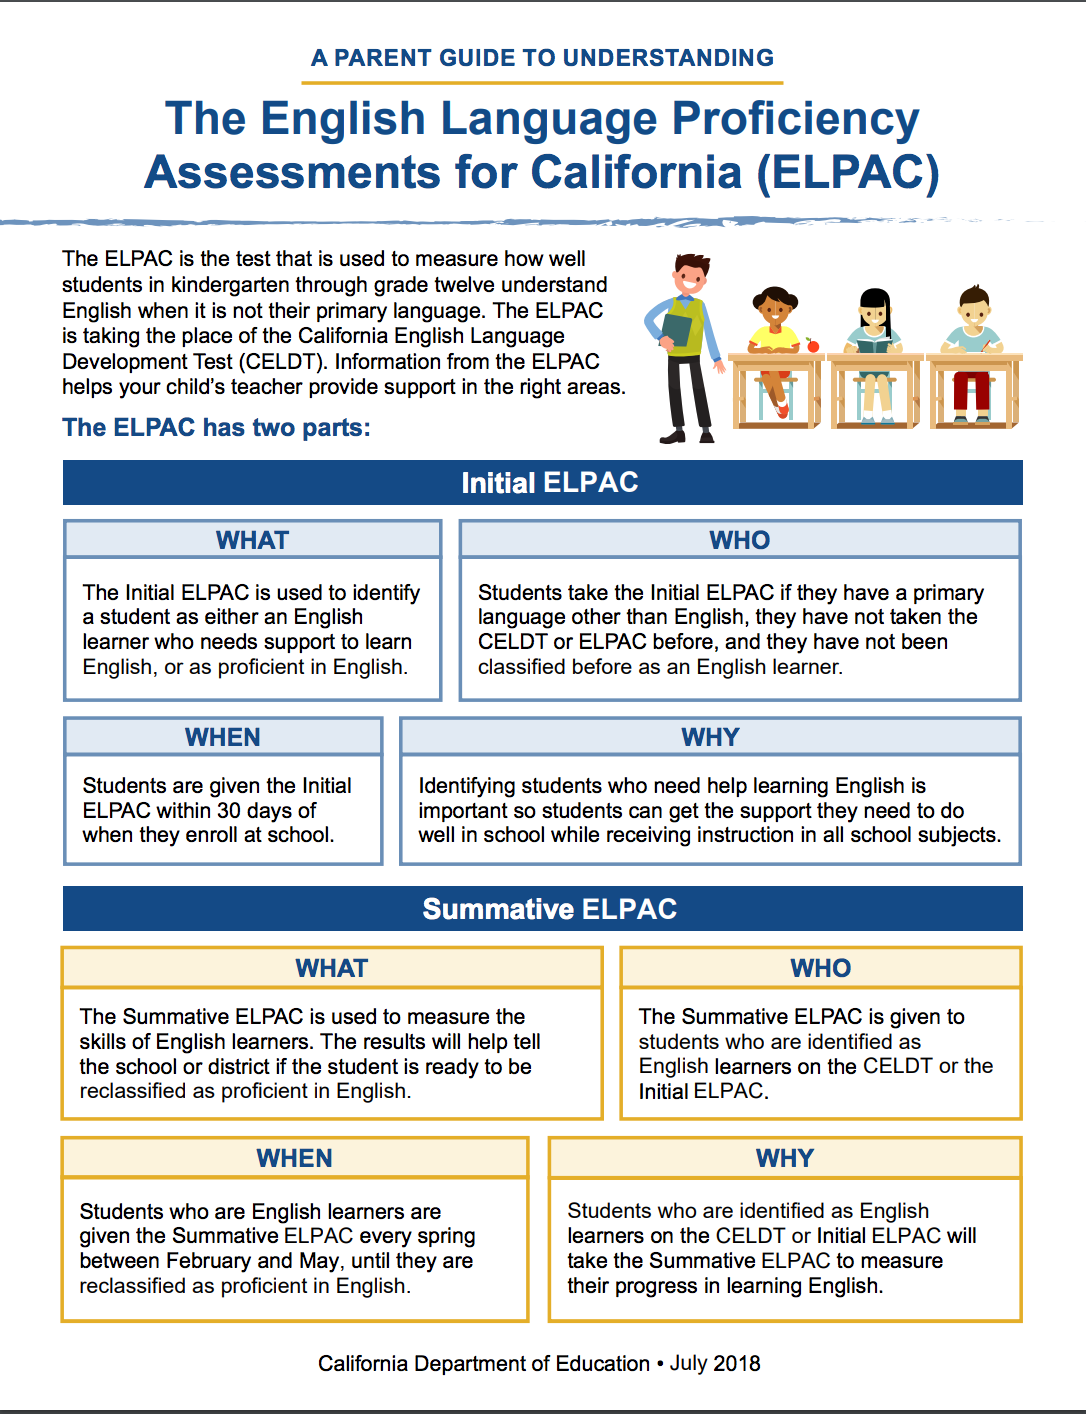 ELPAC Assessments Information for Parents